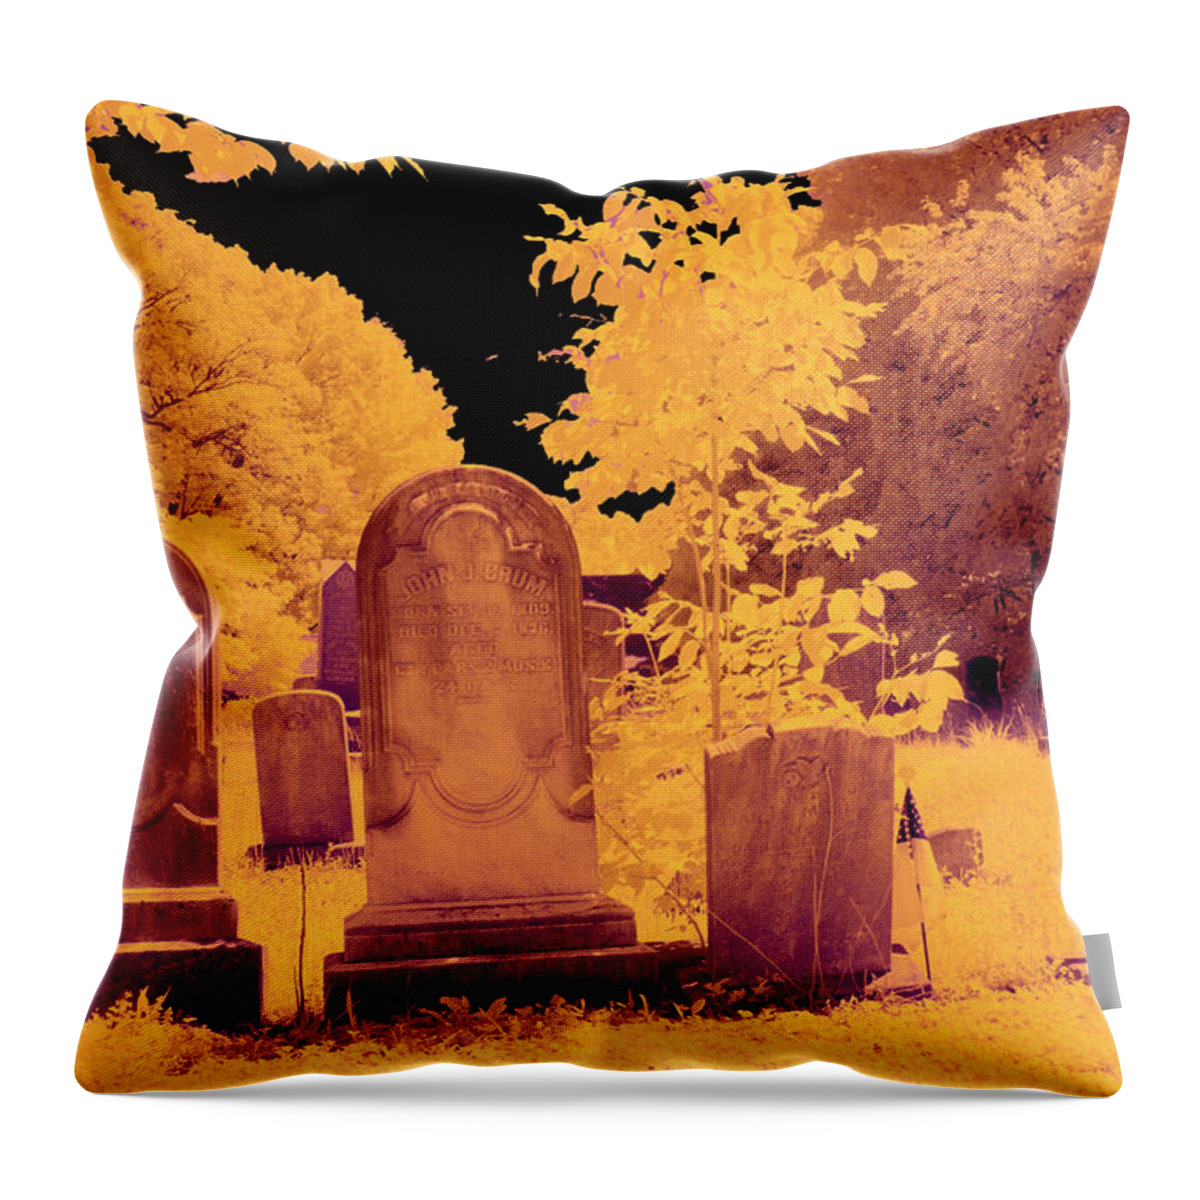 Dir-c-1176-c Throw Pillow featuring the photograph Color Infrared Tombstones by Paul W Faust - Impressions of Light